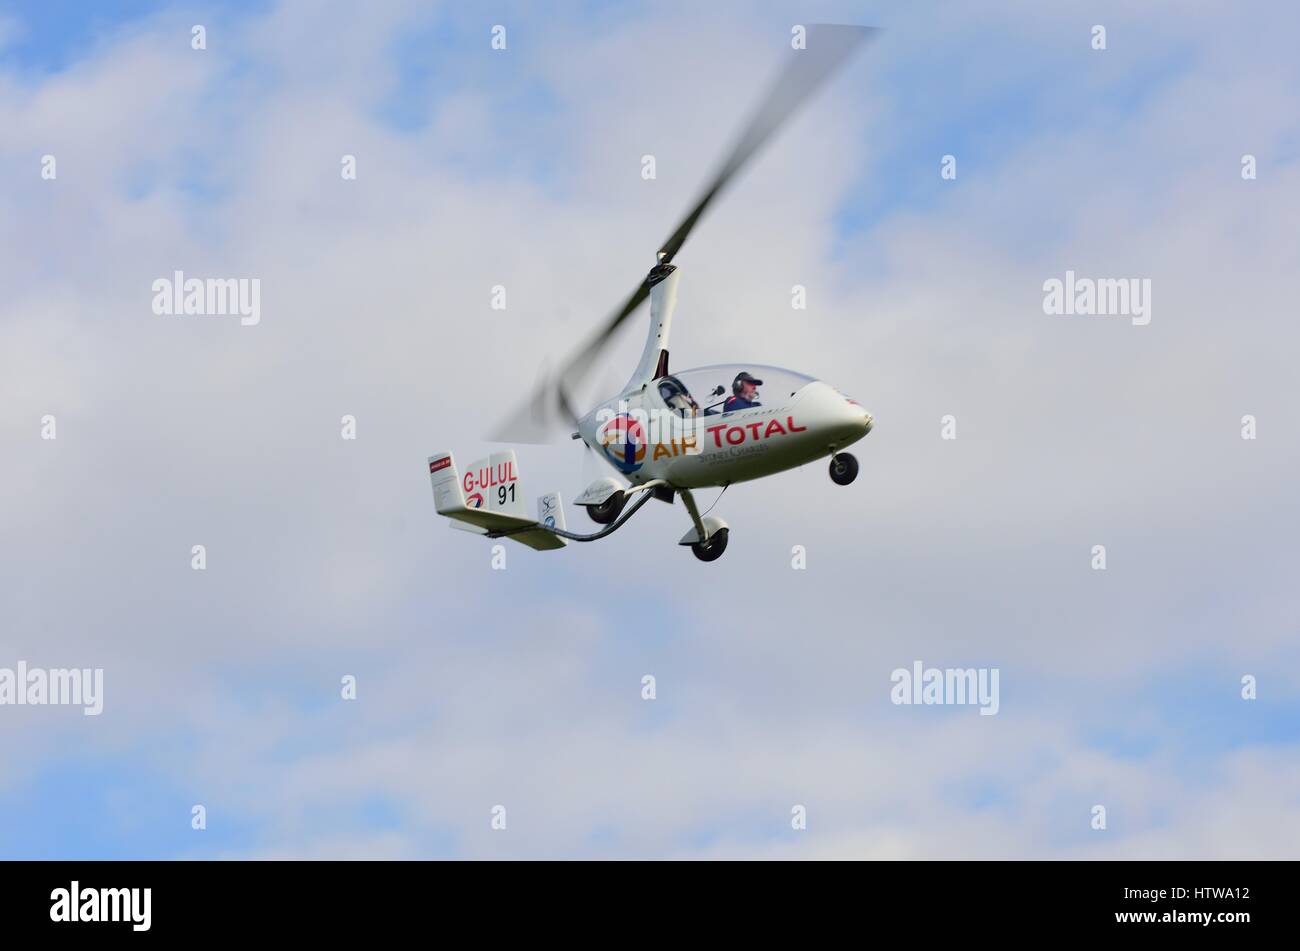 DUXFORD CAMBRIDGESHIRE UK 20 August 2015: Small gyrocopter in flight Stock Photo